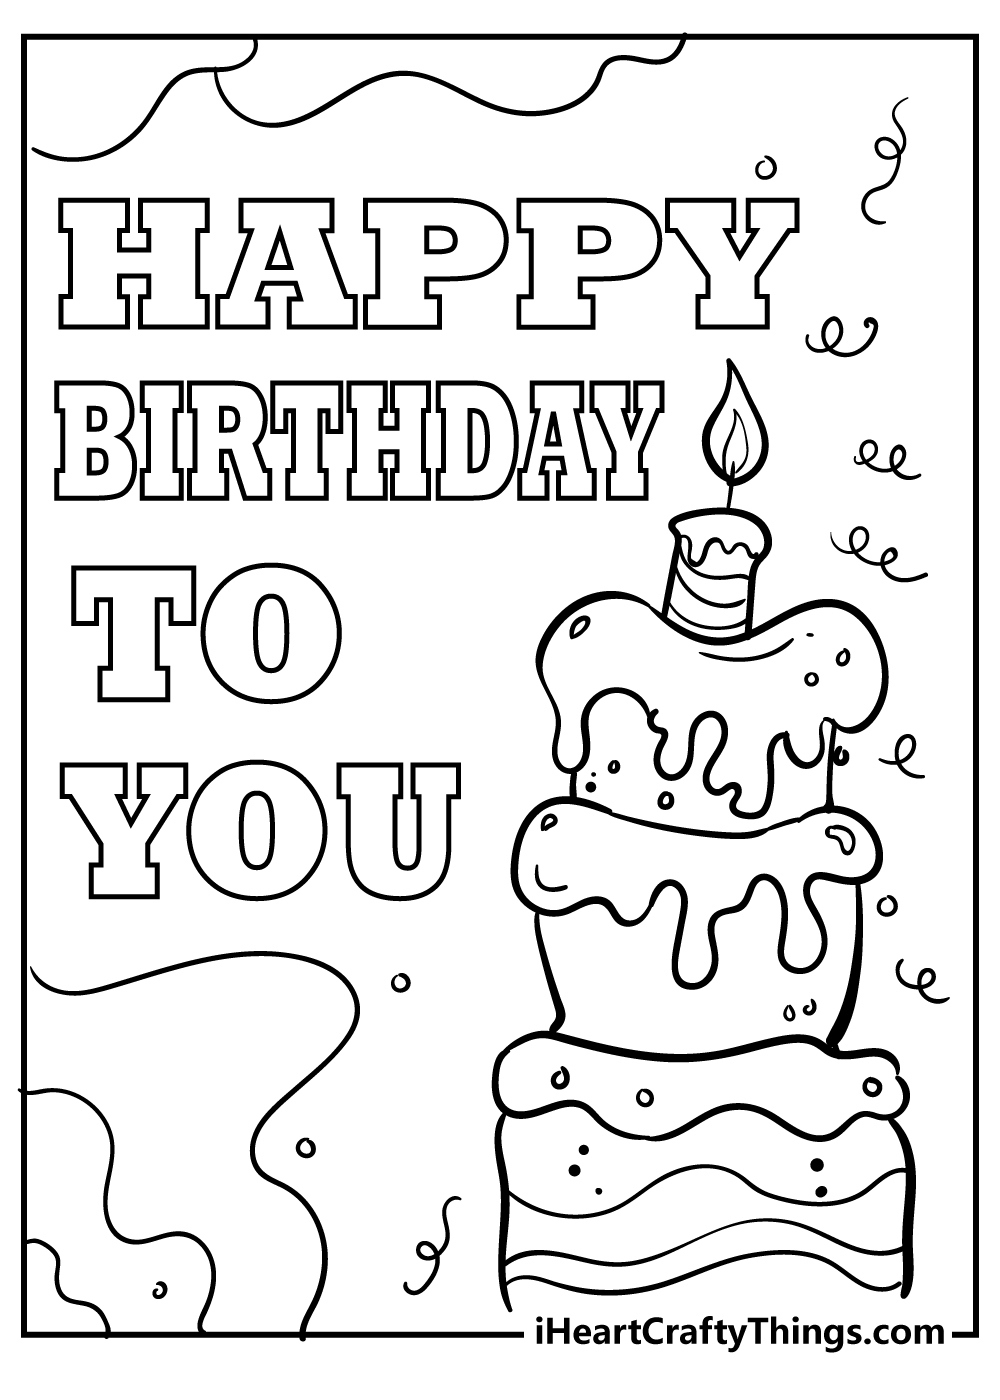 Happy Birthday Coloring Pages (100% Free Printables) with Free Birthday Printables